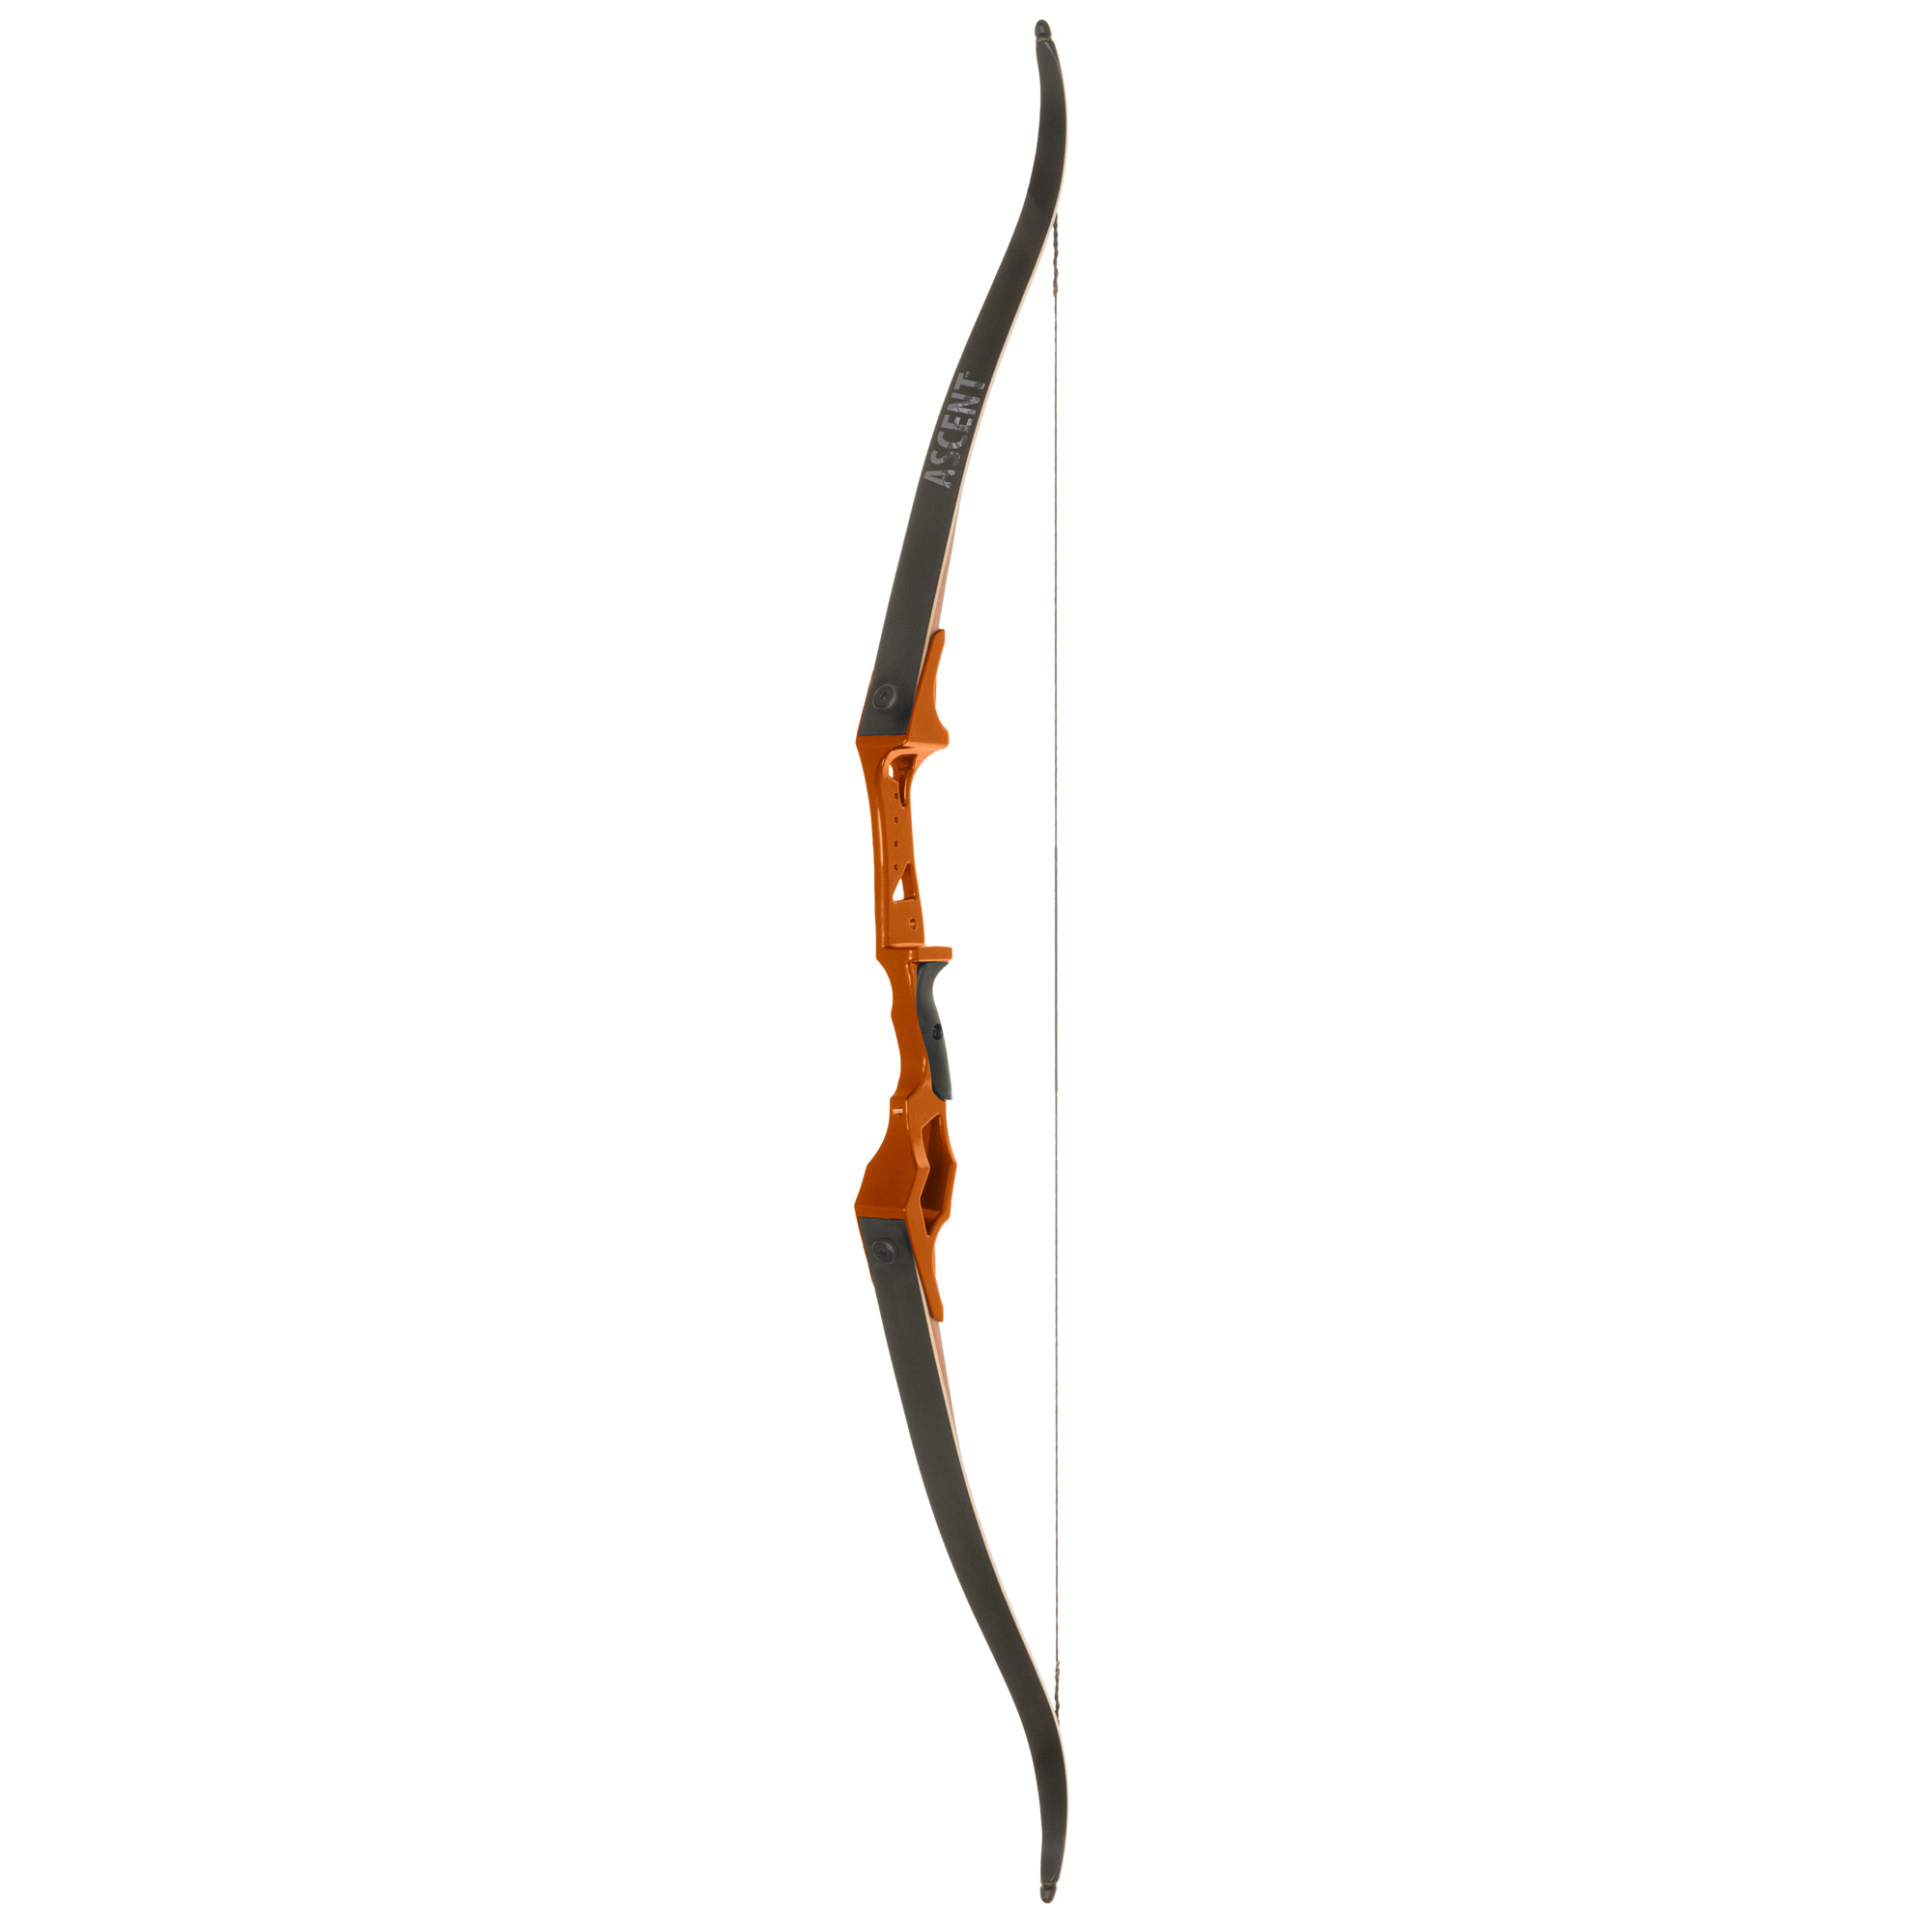 Ascent Recurve Bow, Hunting & Recreation